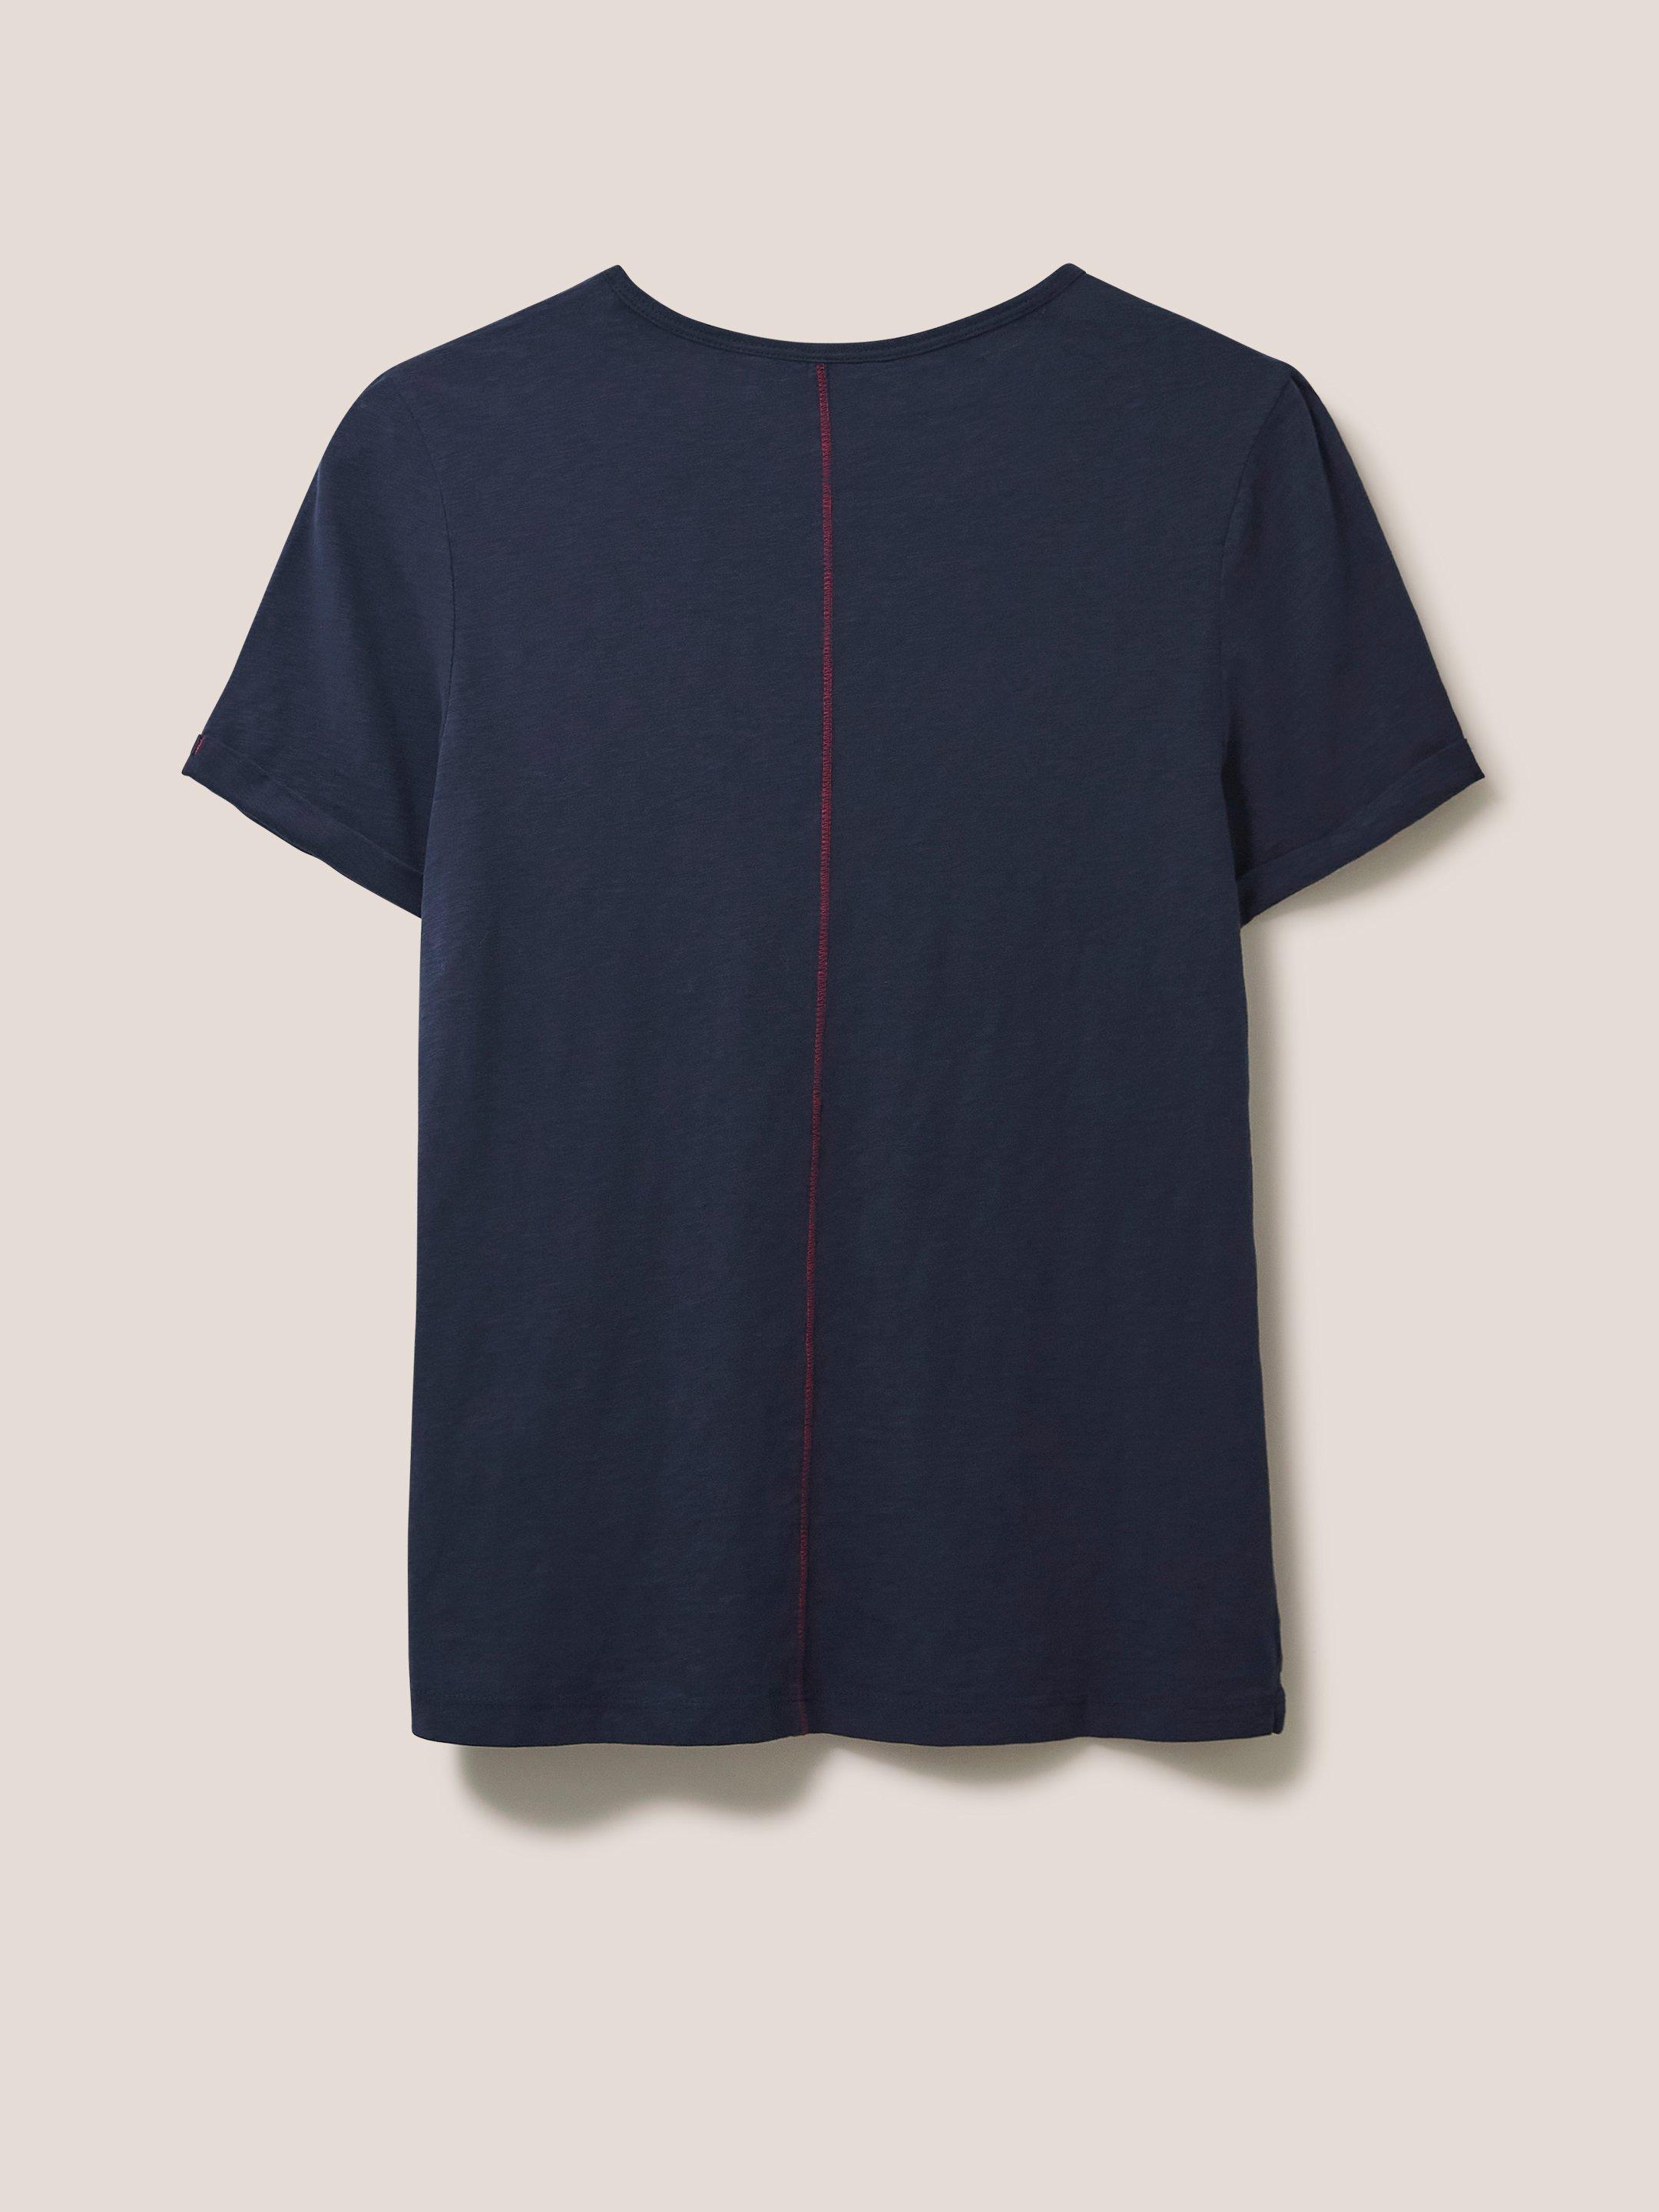 Neo Cotton Tee in FR NAVY - FLAT BACK